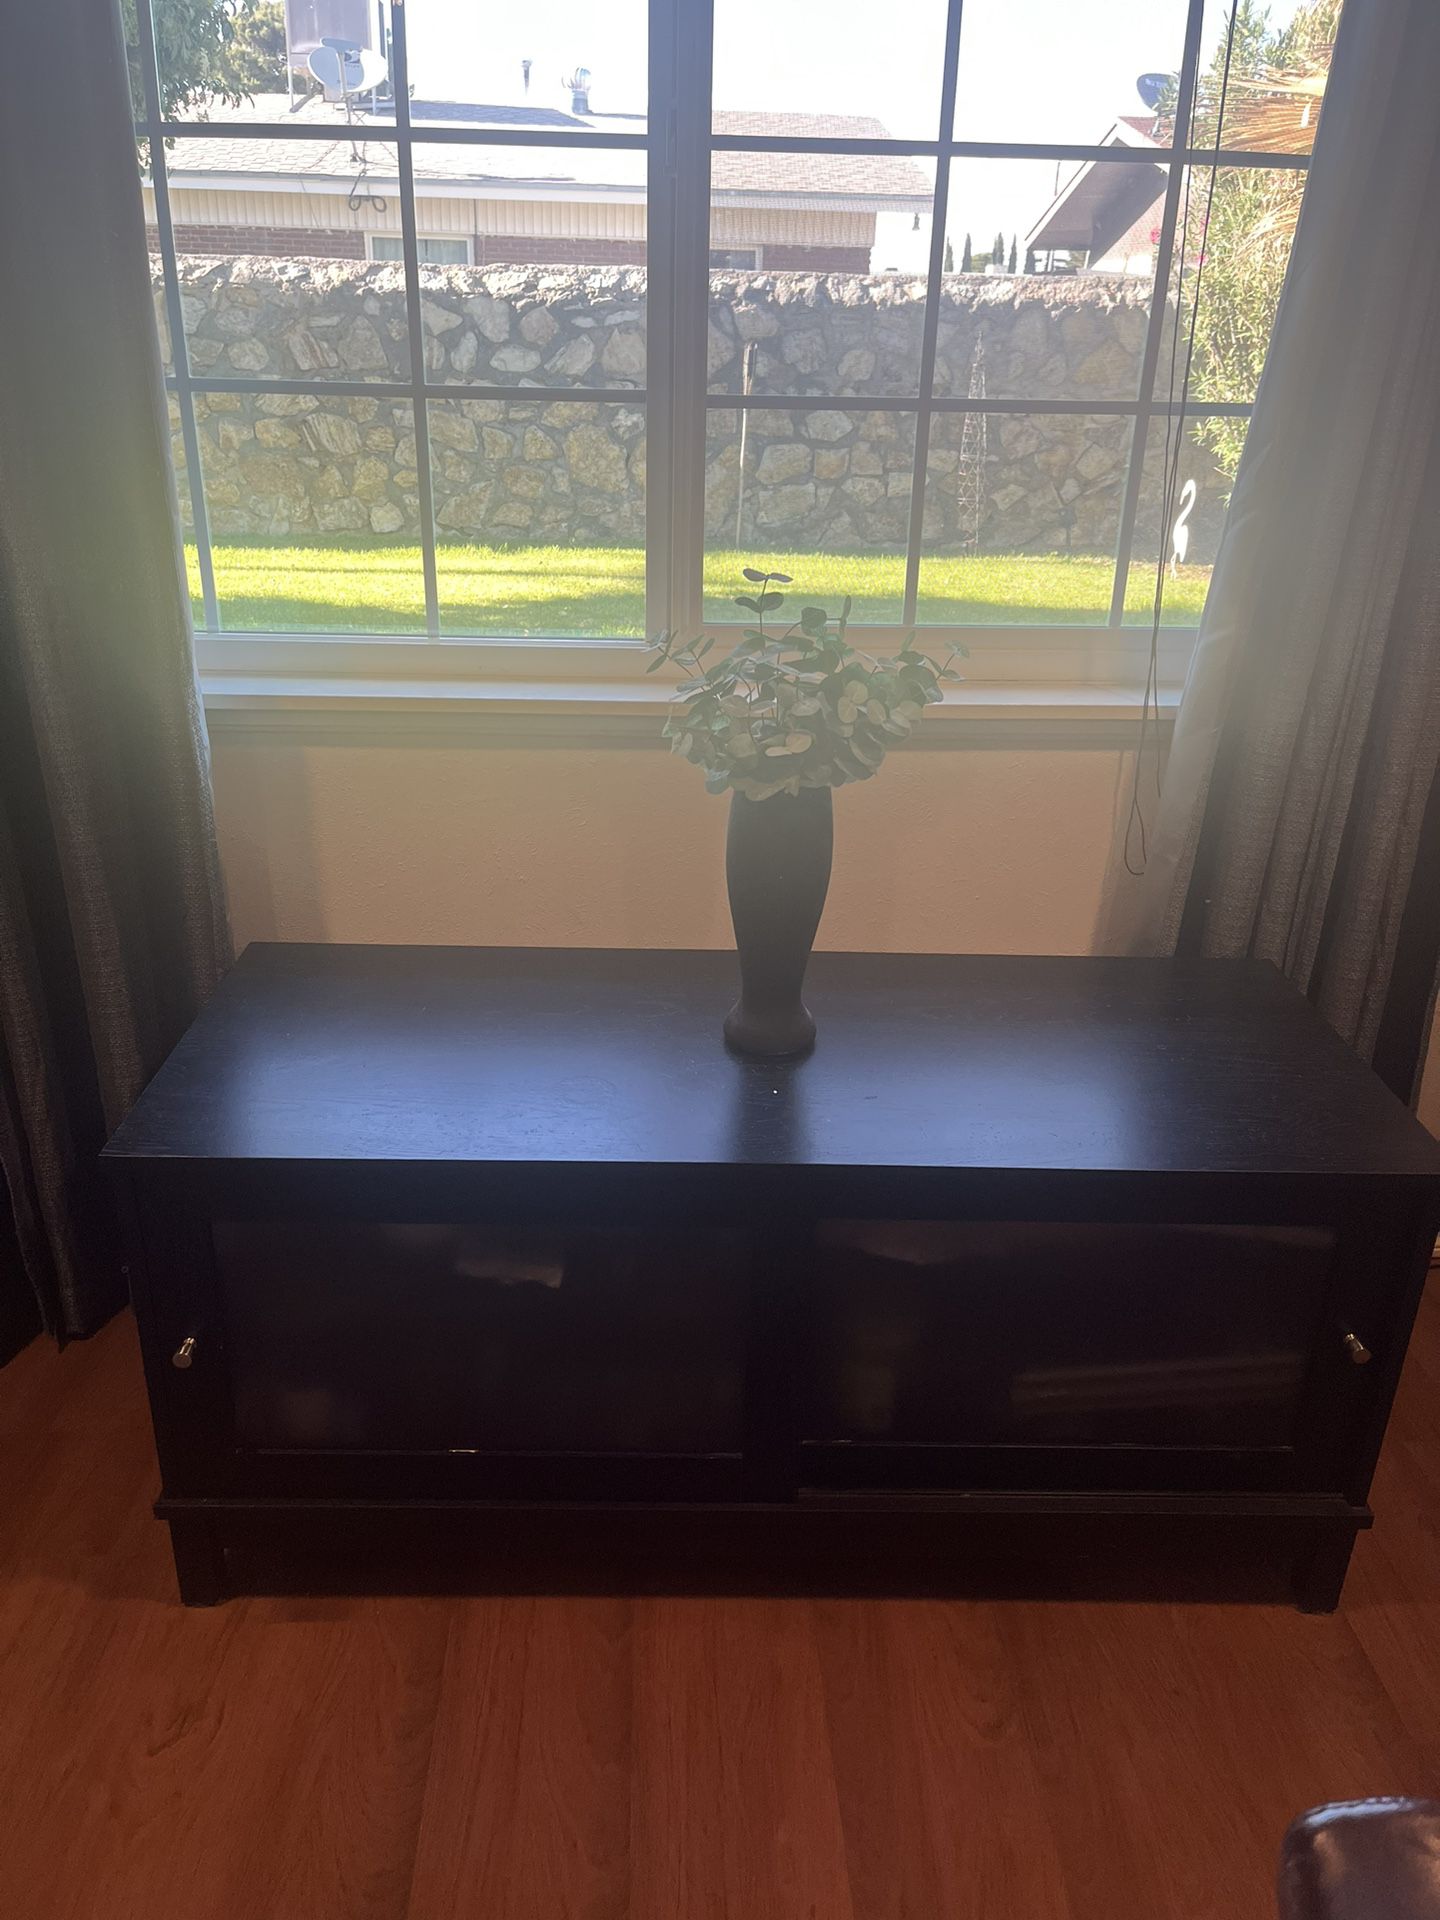 Black TV Stand With Storage 